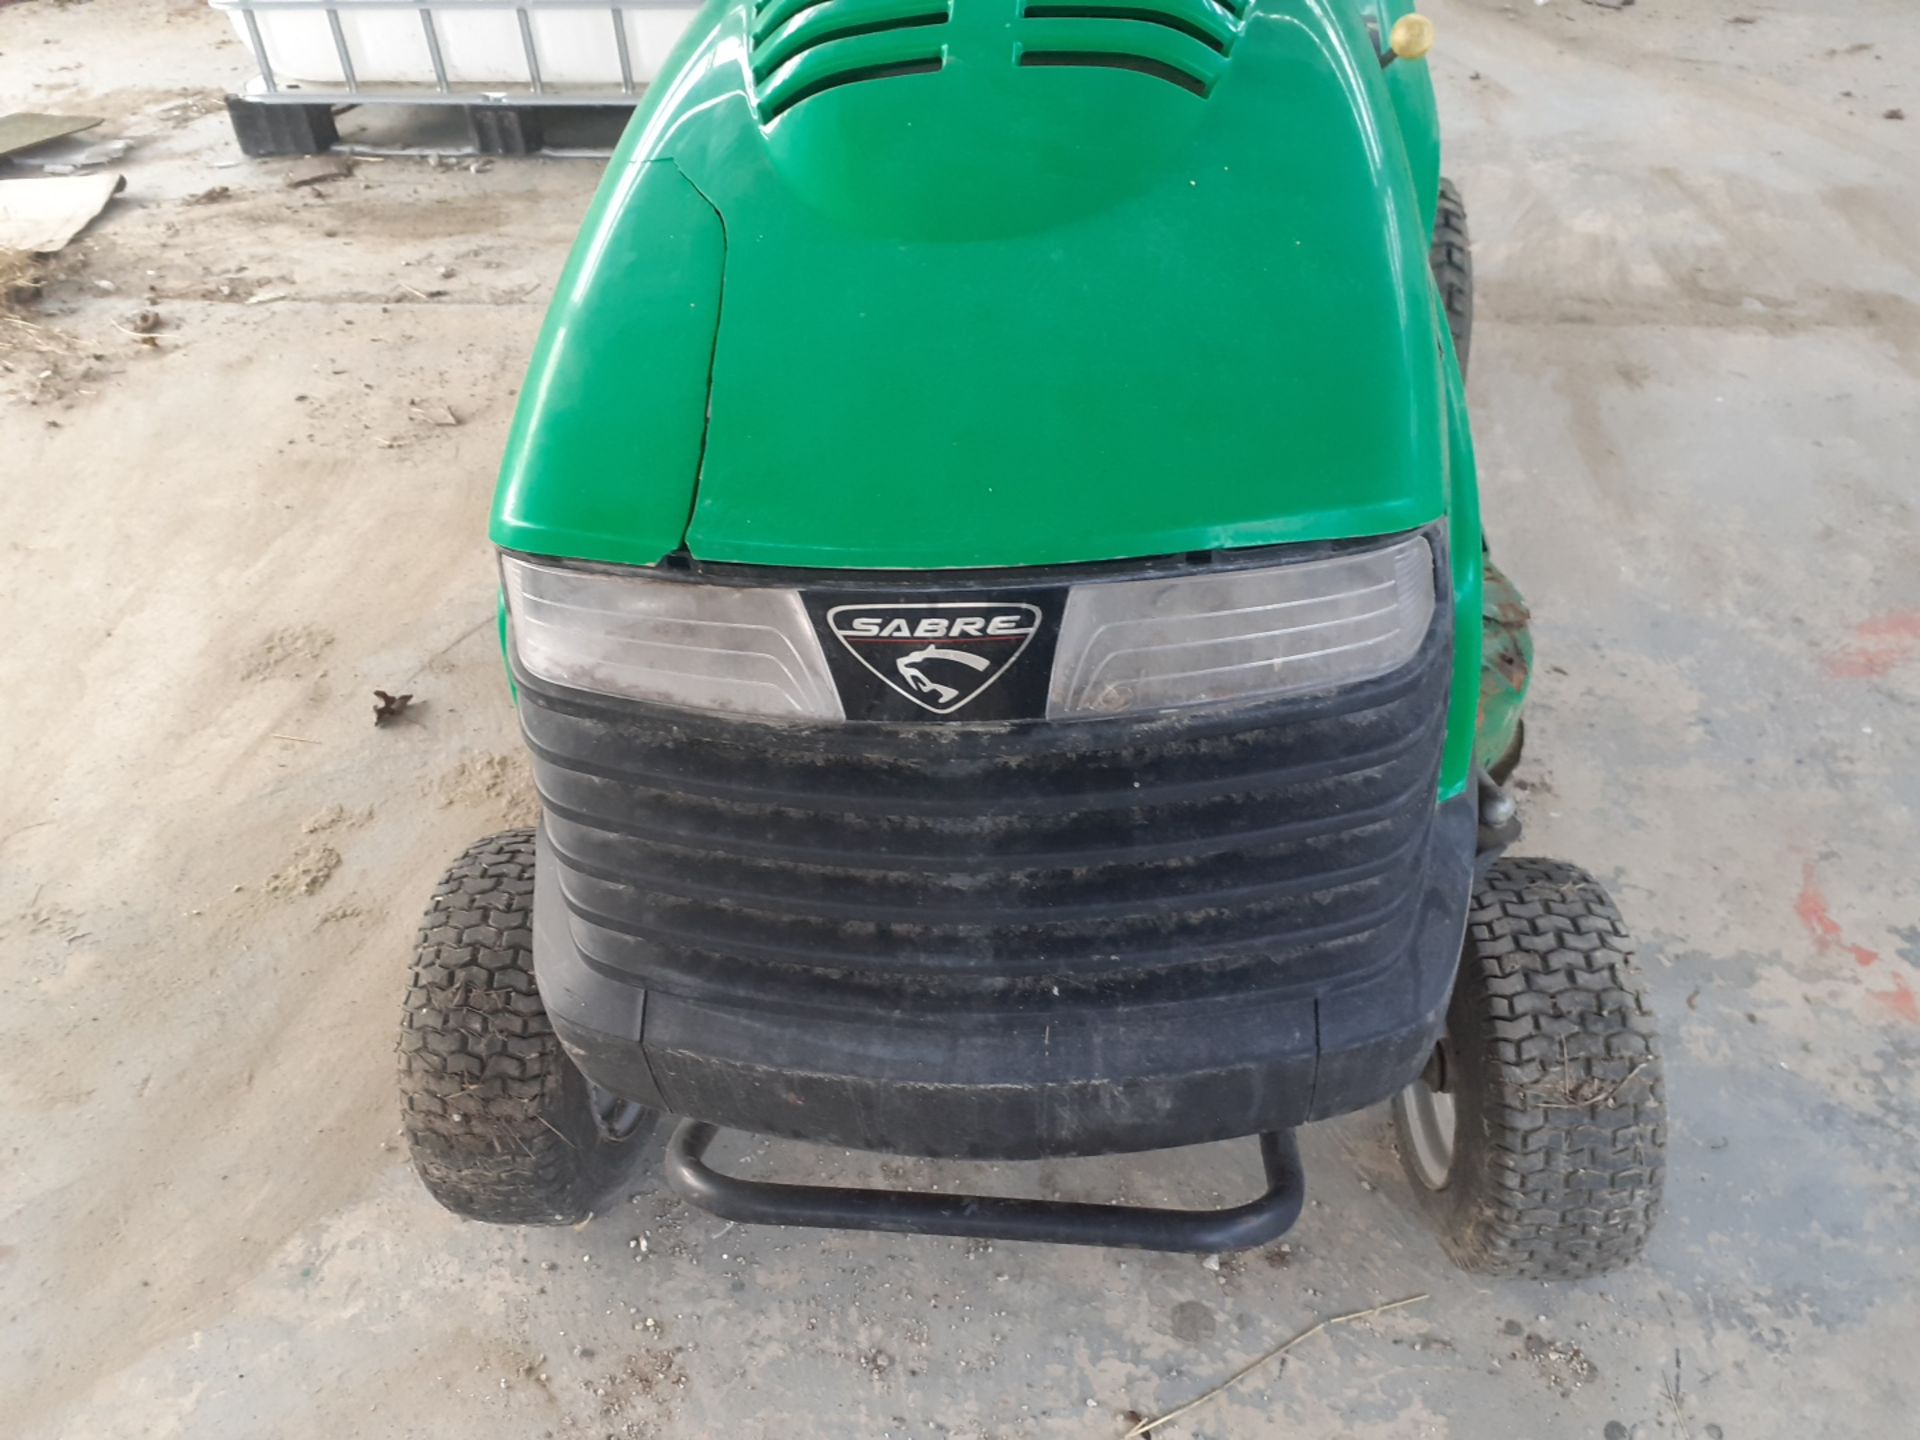 JOHN DEERE SABRE RIDE ON MOWER 1338 MODEL, NOT USED FOR 12 MONTHS - WILL REQUIRE BATTERY & SERVICE - Image 2 of 8